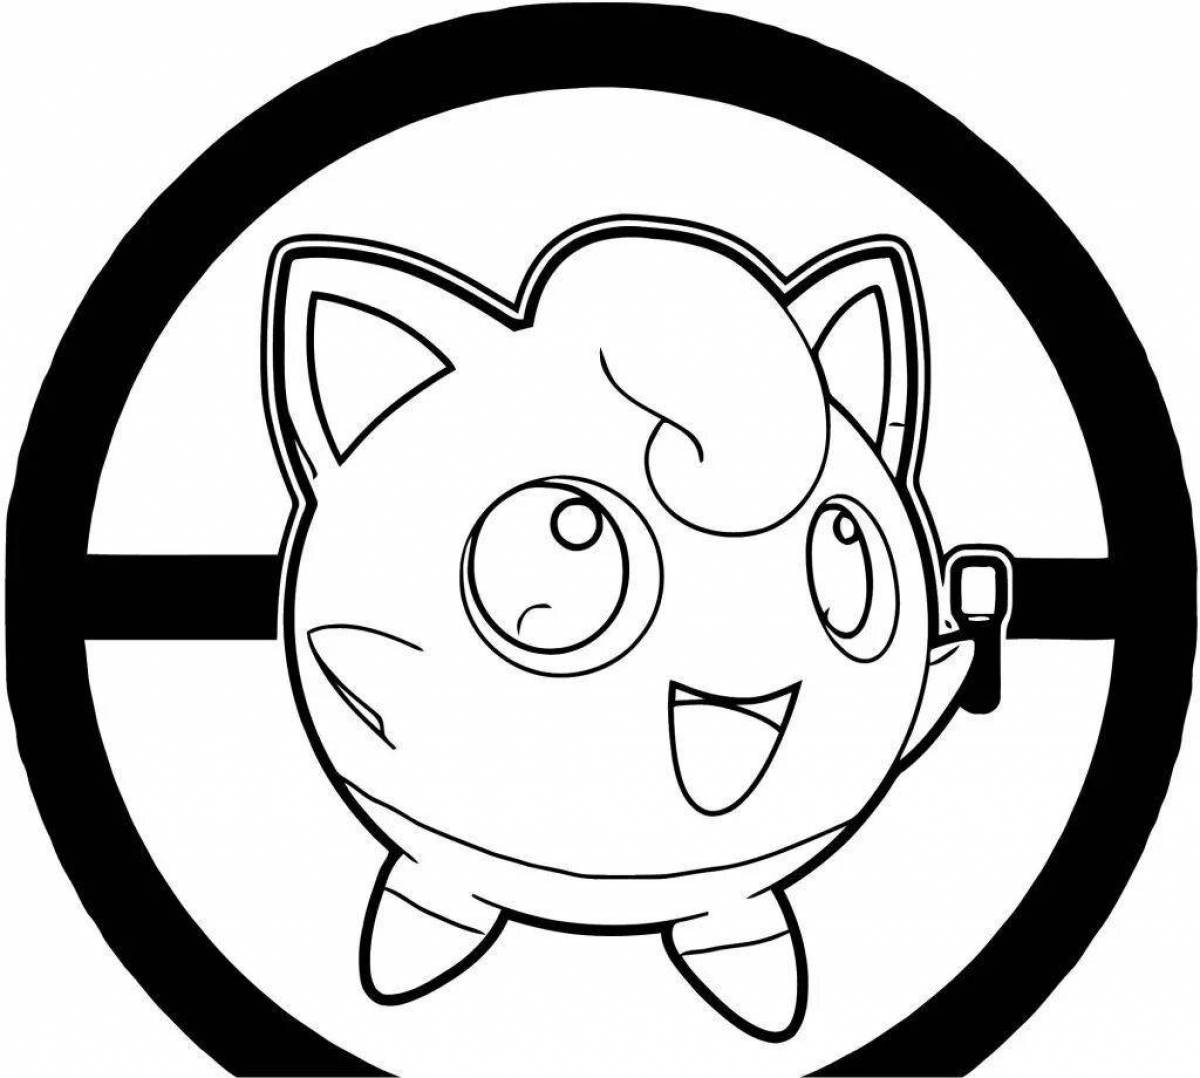 Majestic jigglypuff coloring page